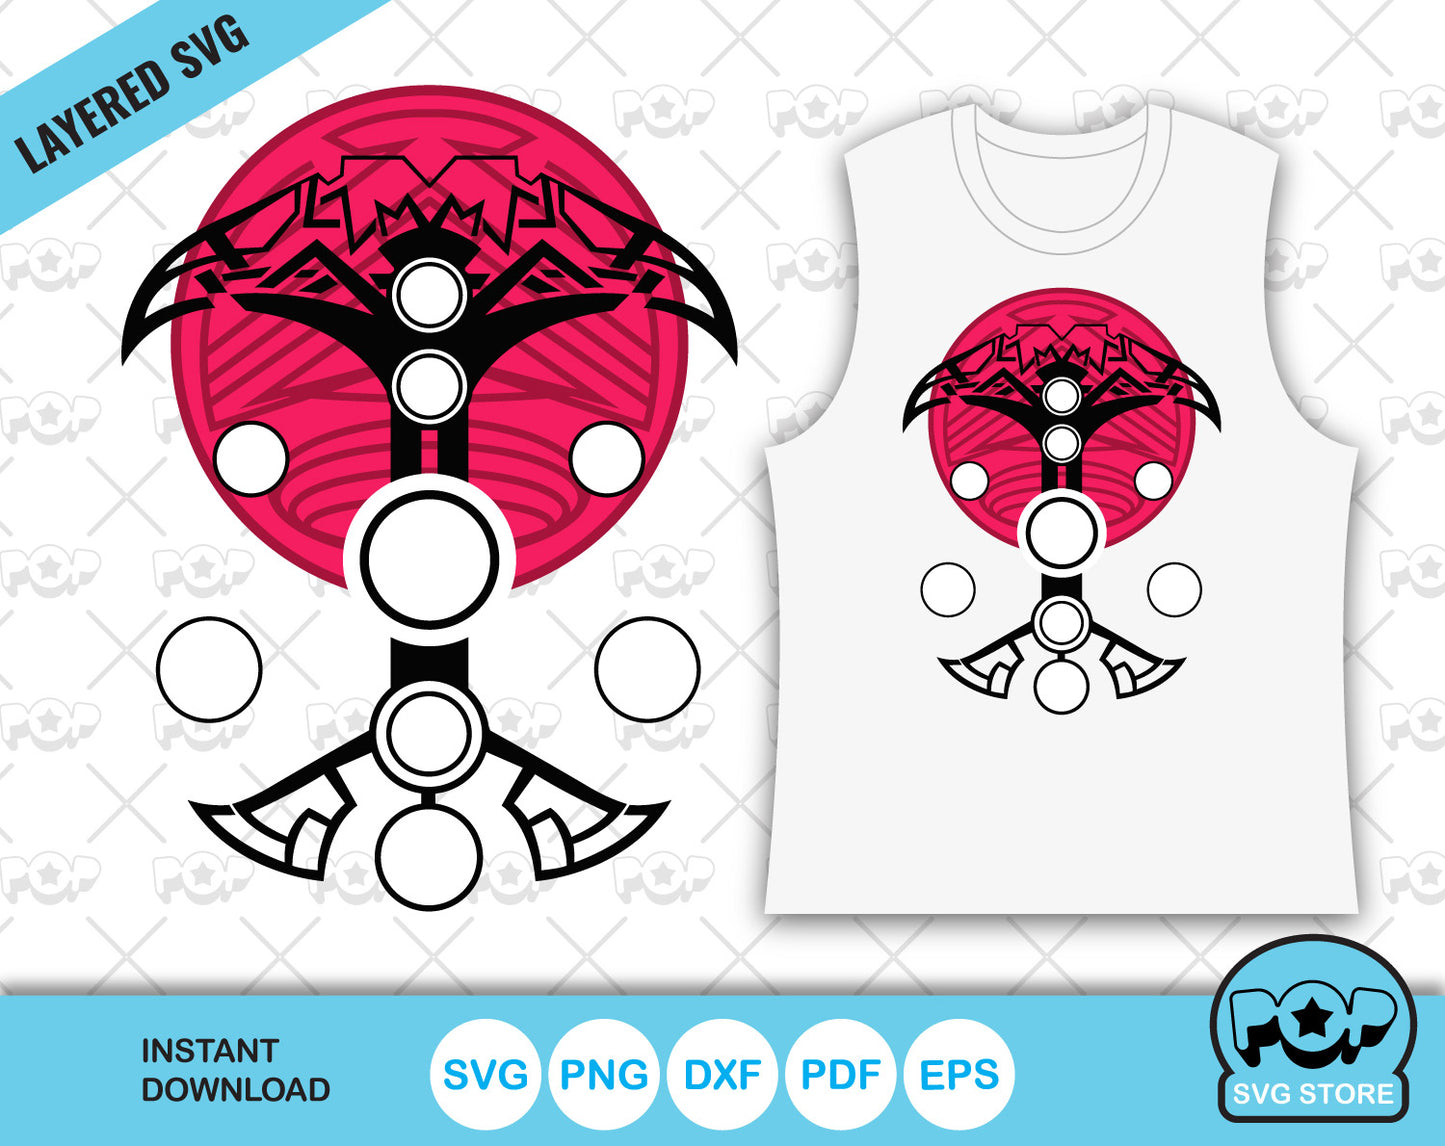 Thor Love and Thunder t-shirt design, SVG cut files for Cricut / Silhouette, Thor 4 clipart, Designs for sublimation